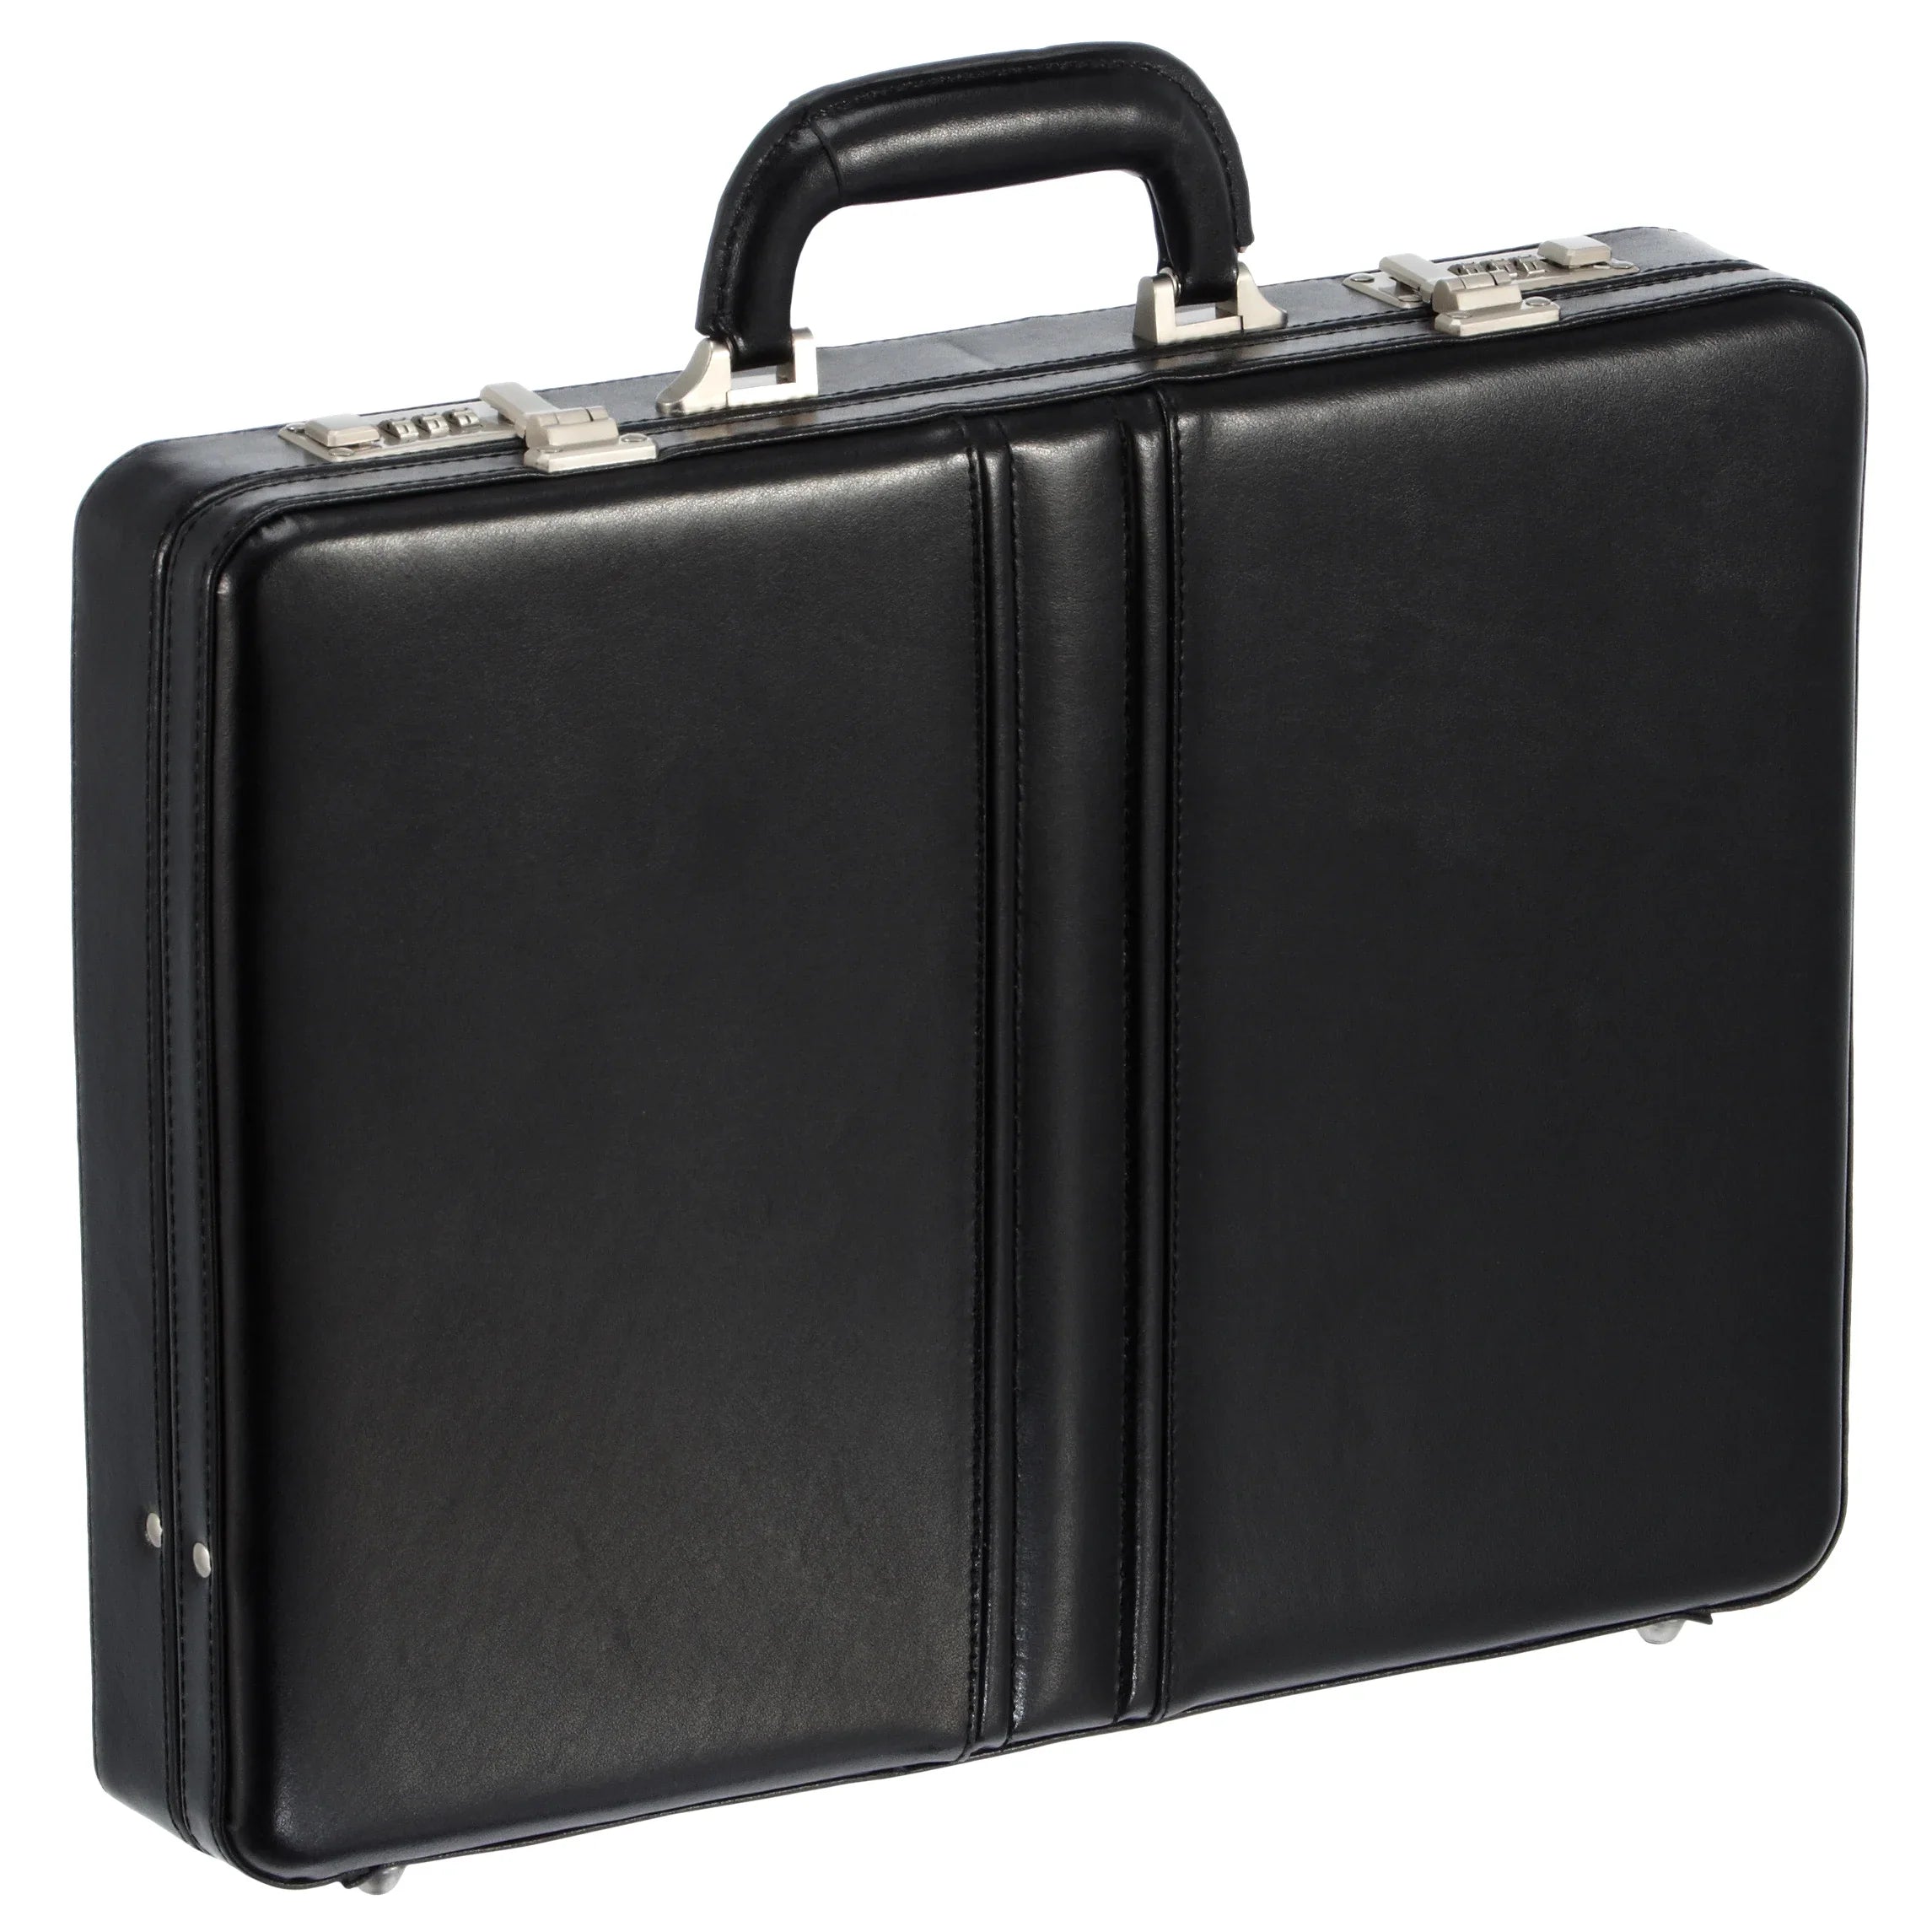 Dermata business briefcase made of leather 43 cm - black